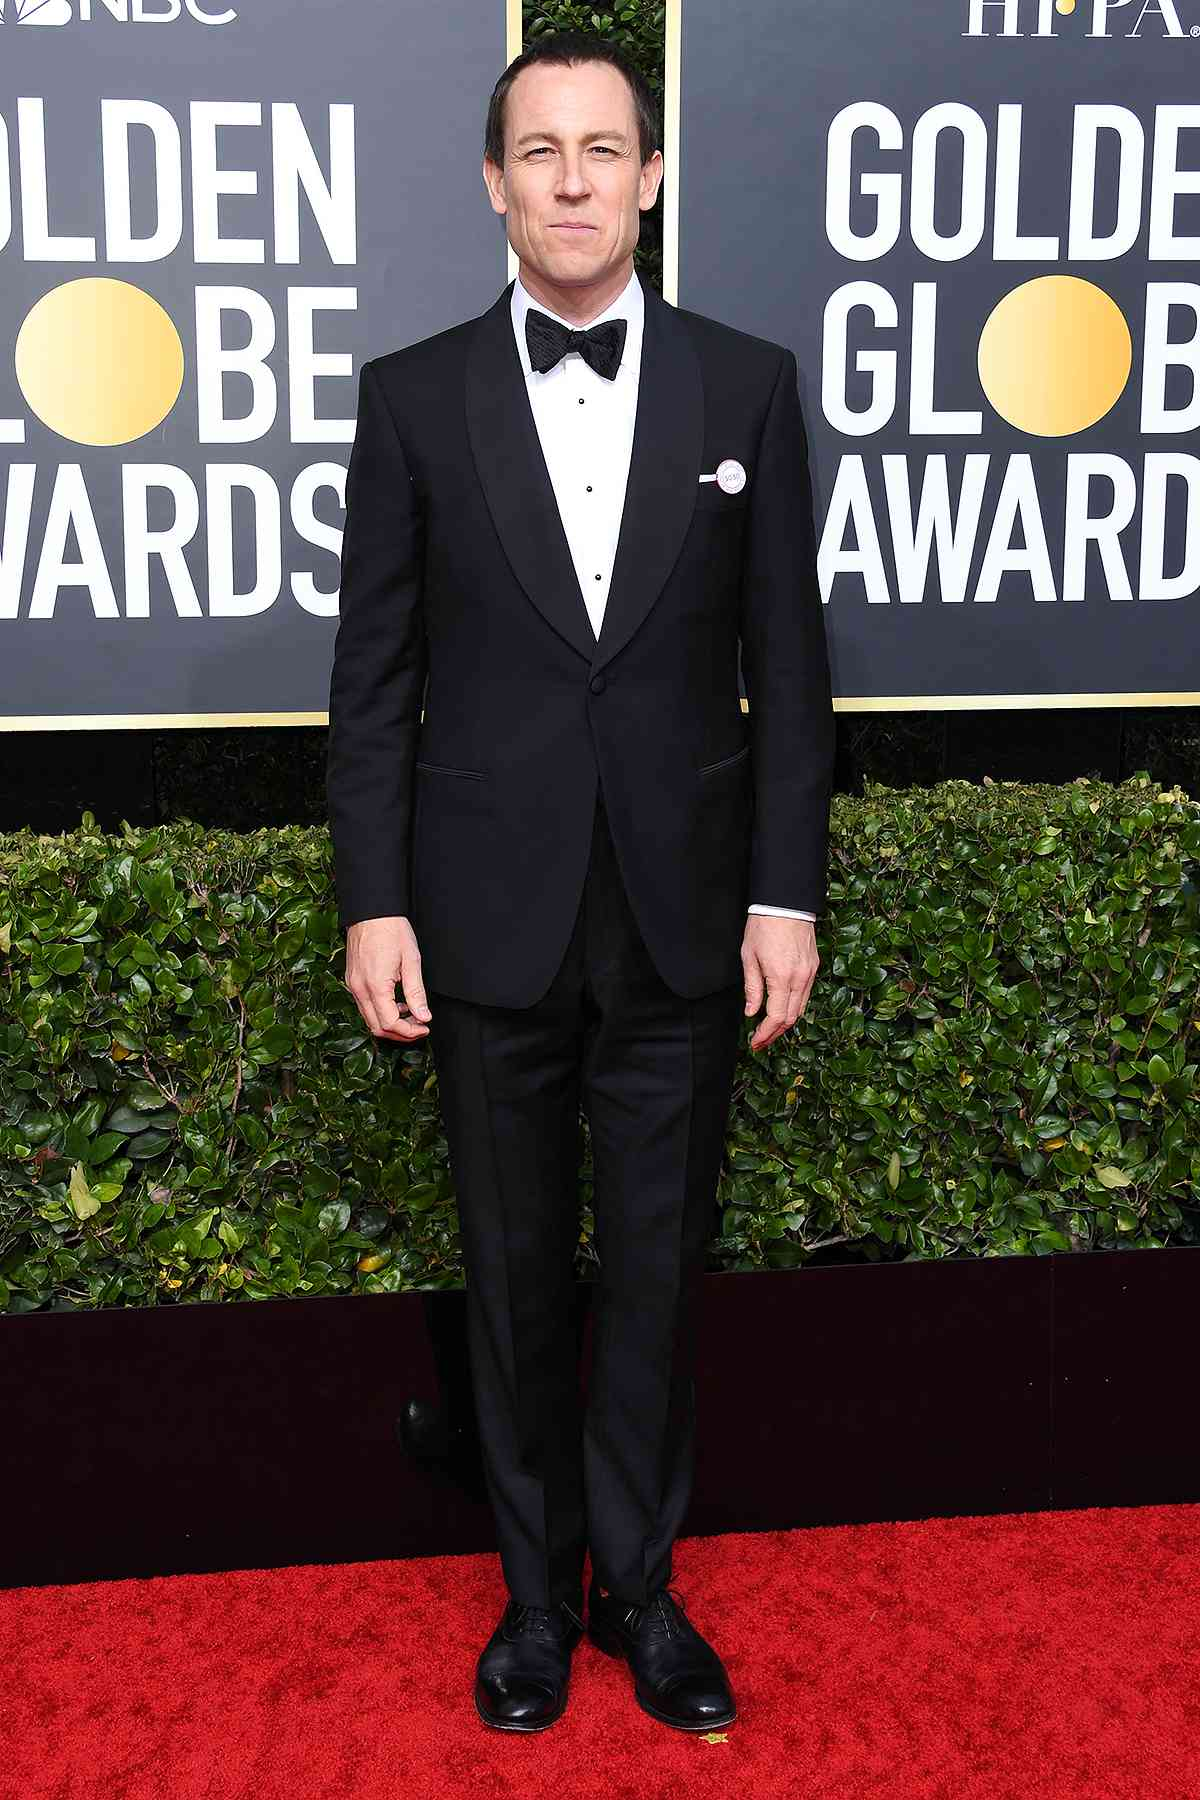 Tobias Menzies at the Golden Globe Awards Show